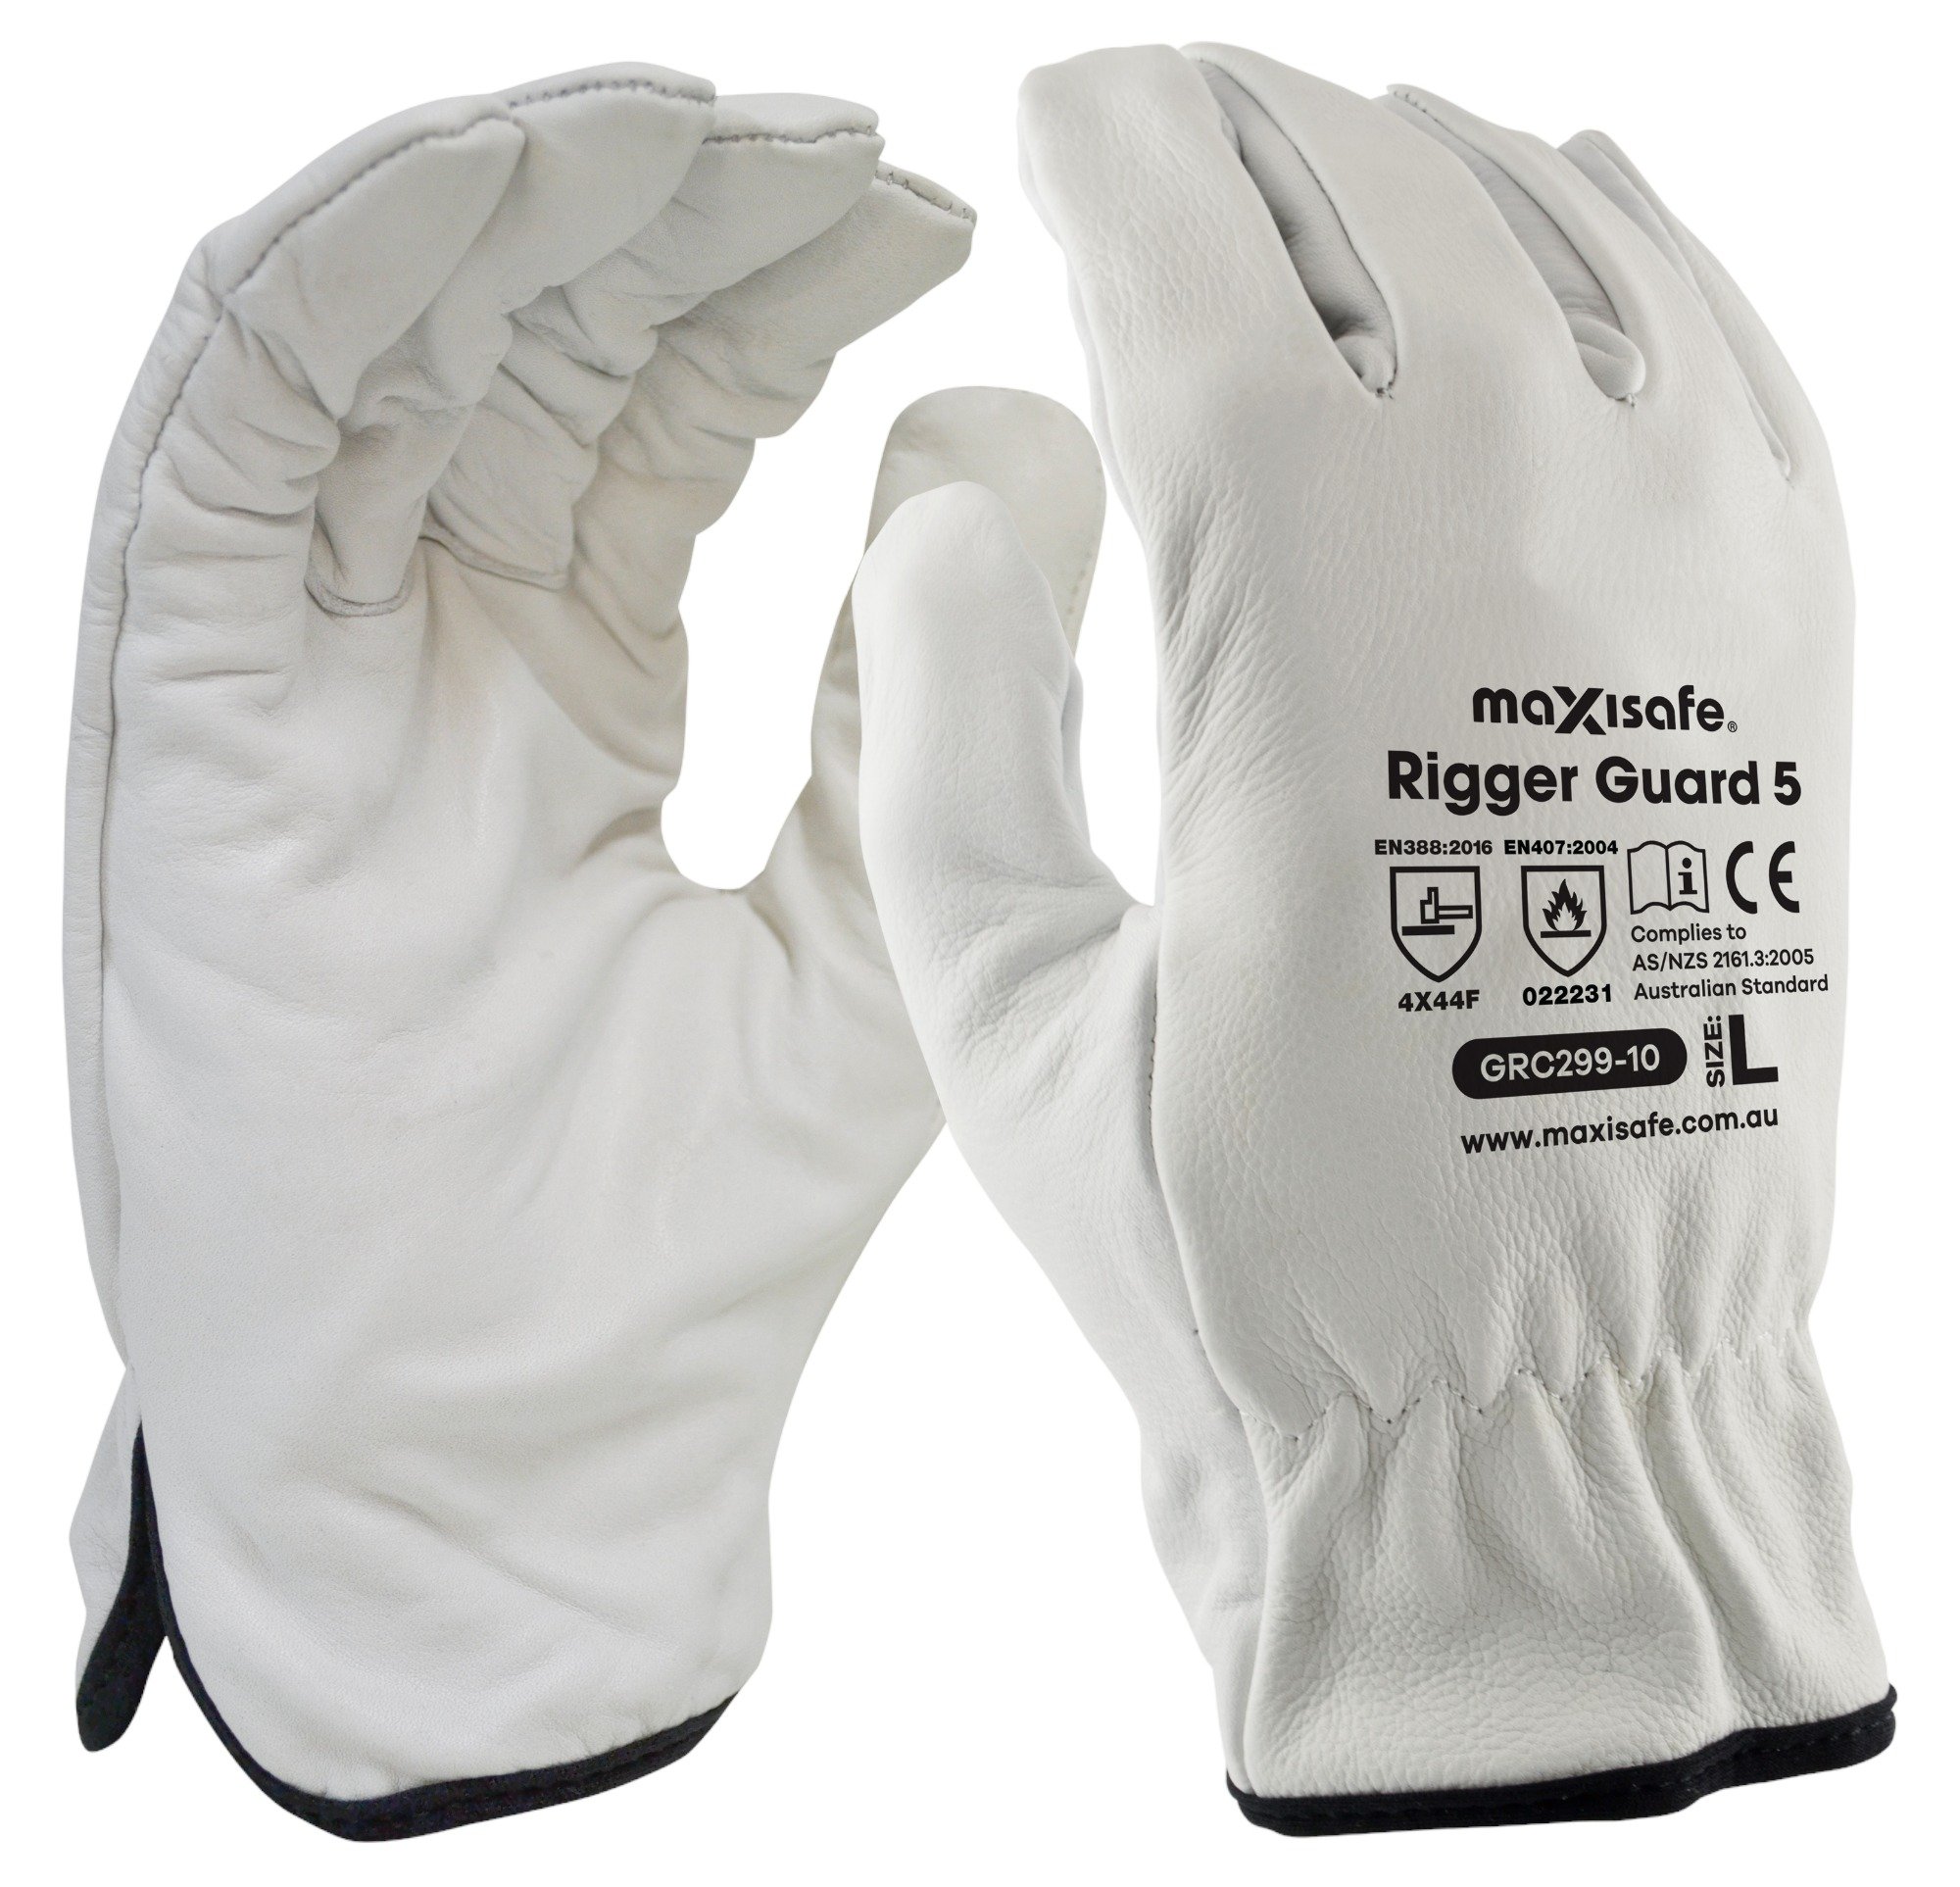 Maxisafe 'Rigger Guard 5' Cut Resistant Glove - Retail Carded